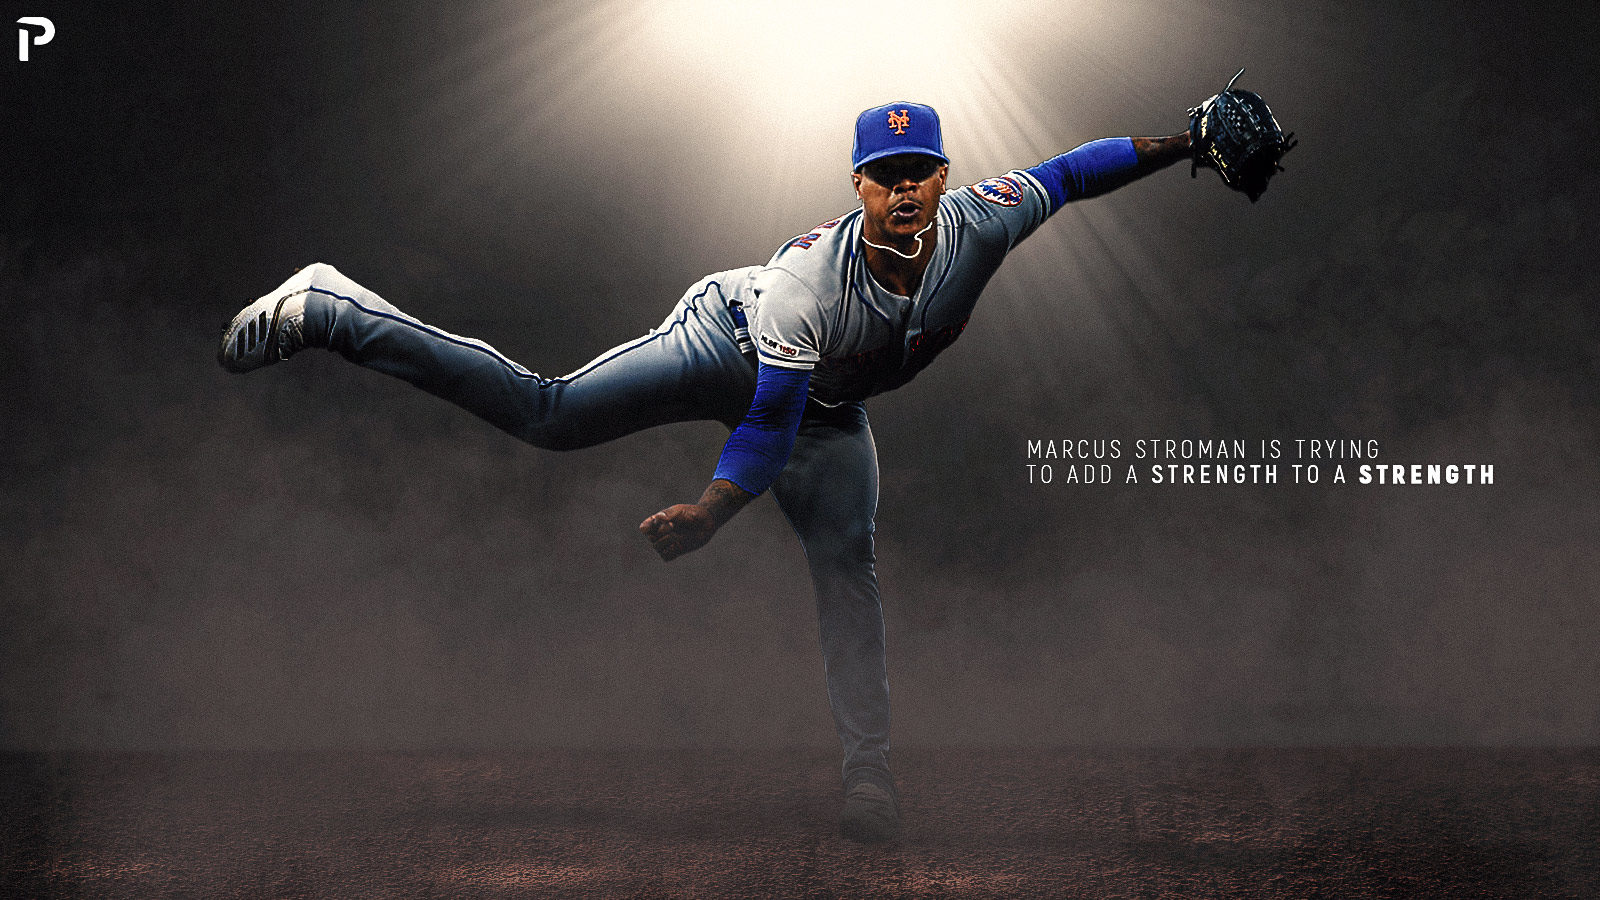 Marcus Stroman Is Trying to Add a Strength to a Strength